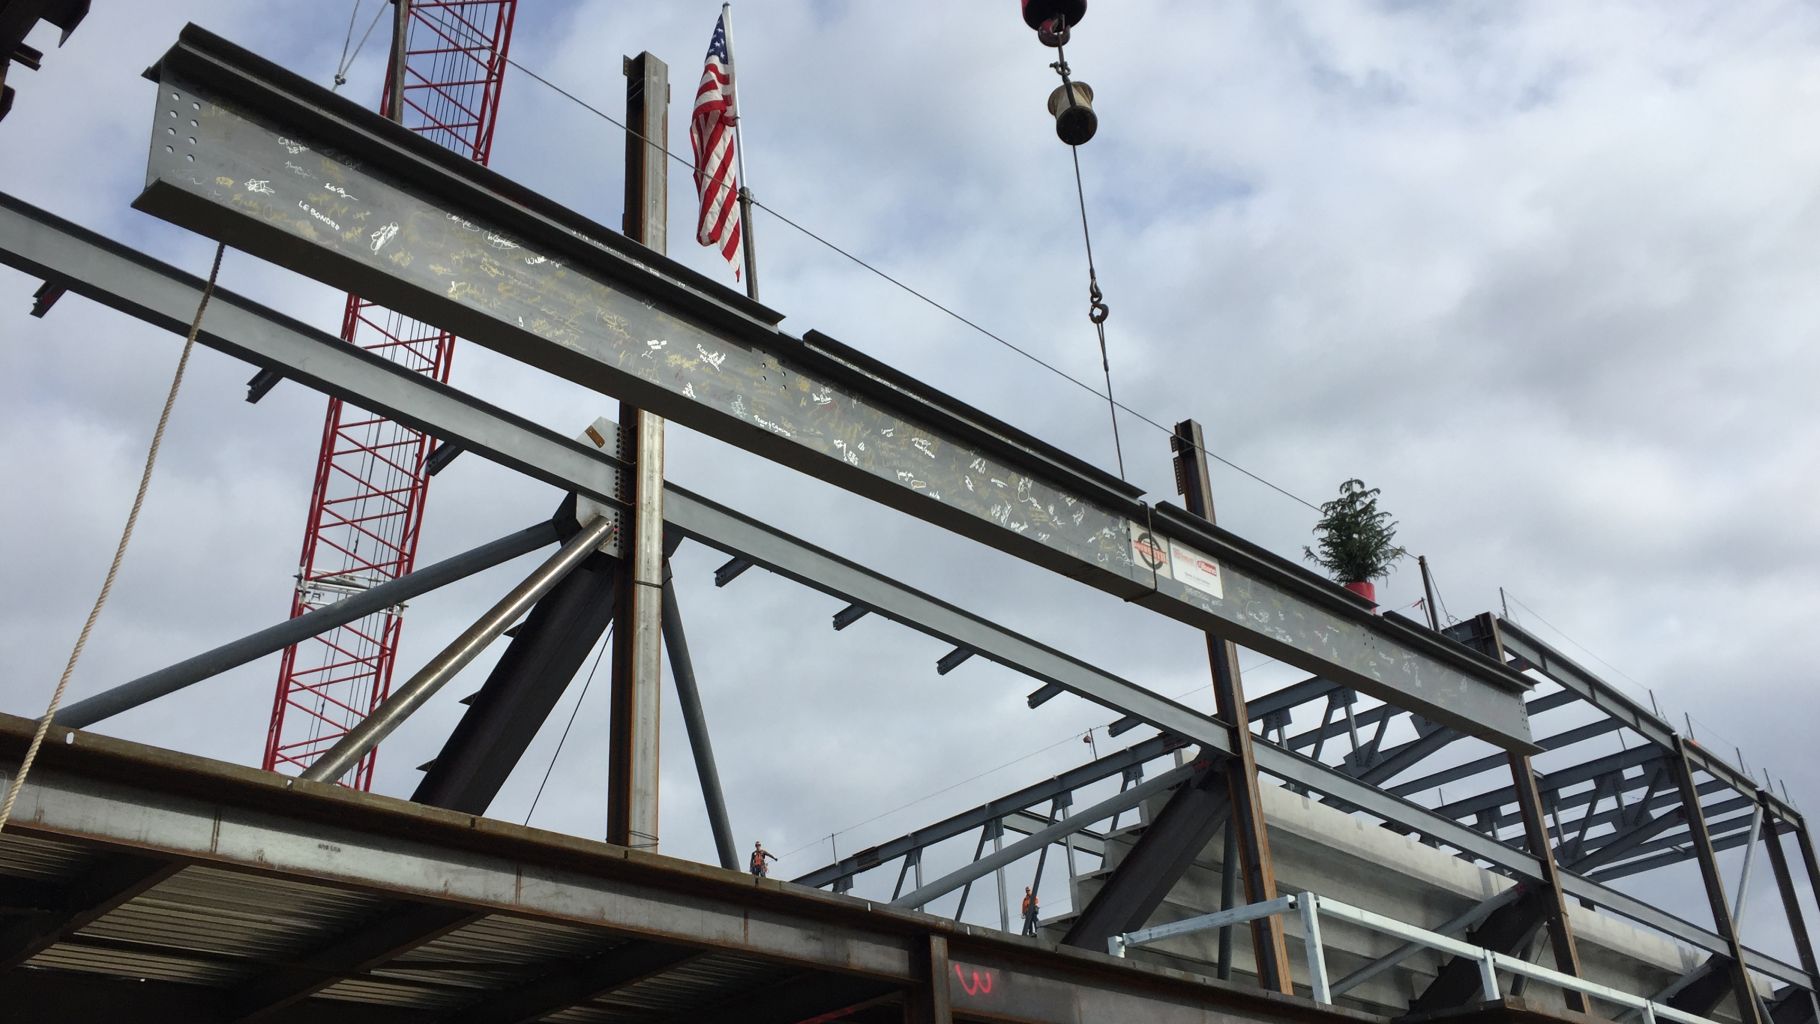 Congress Heights Comes Together for ESA “Topping Out”